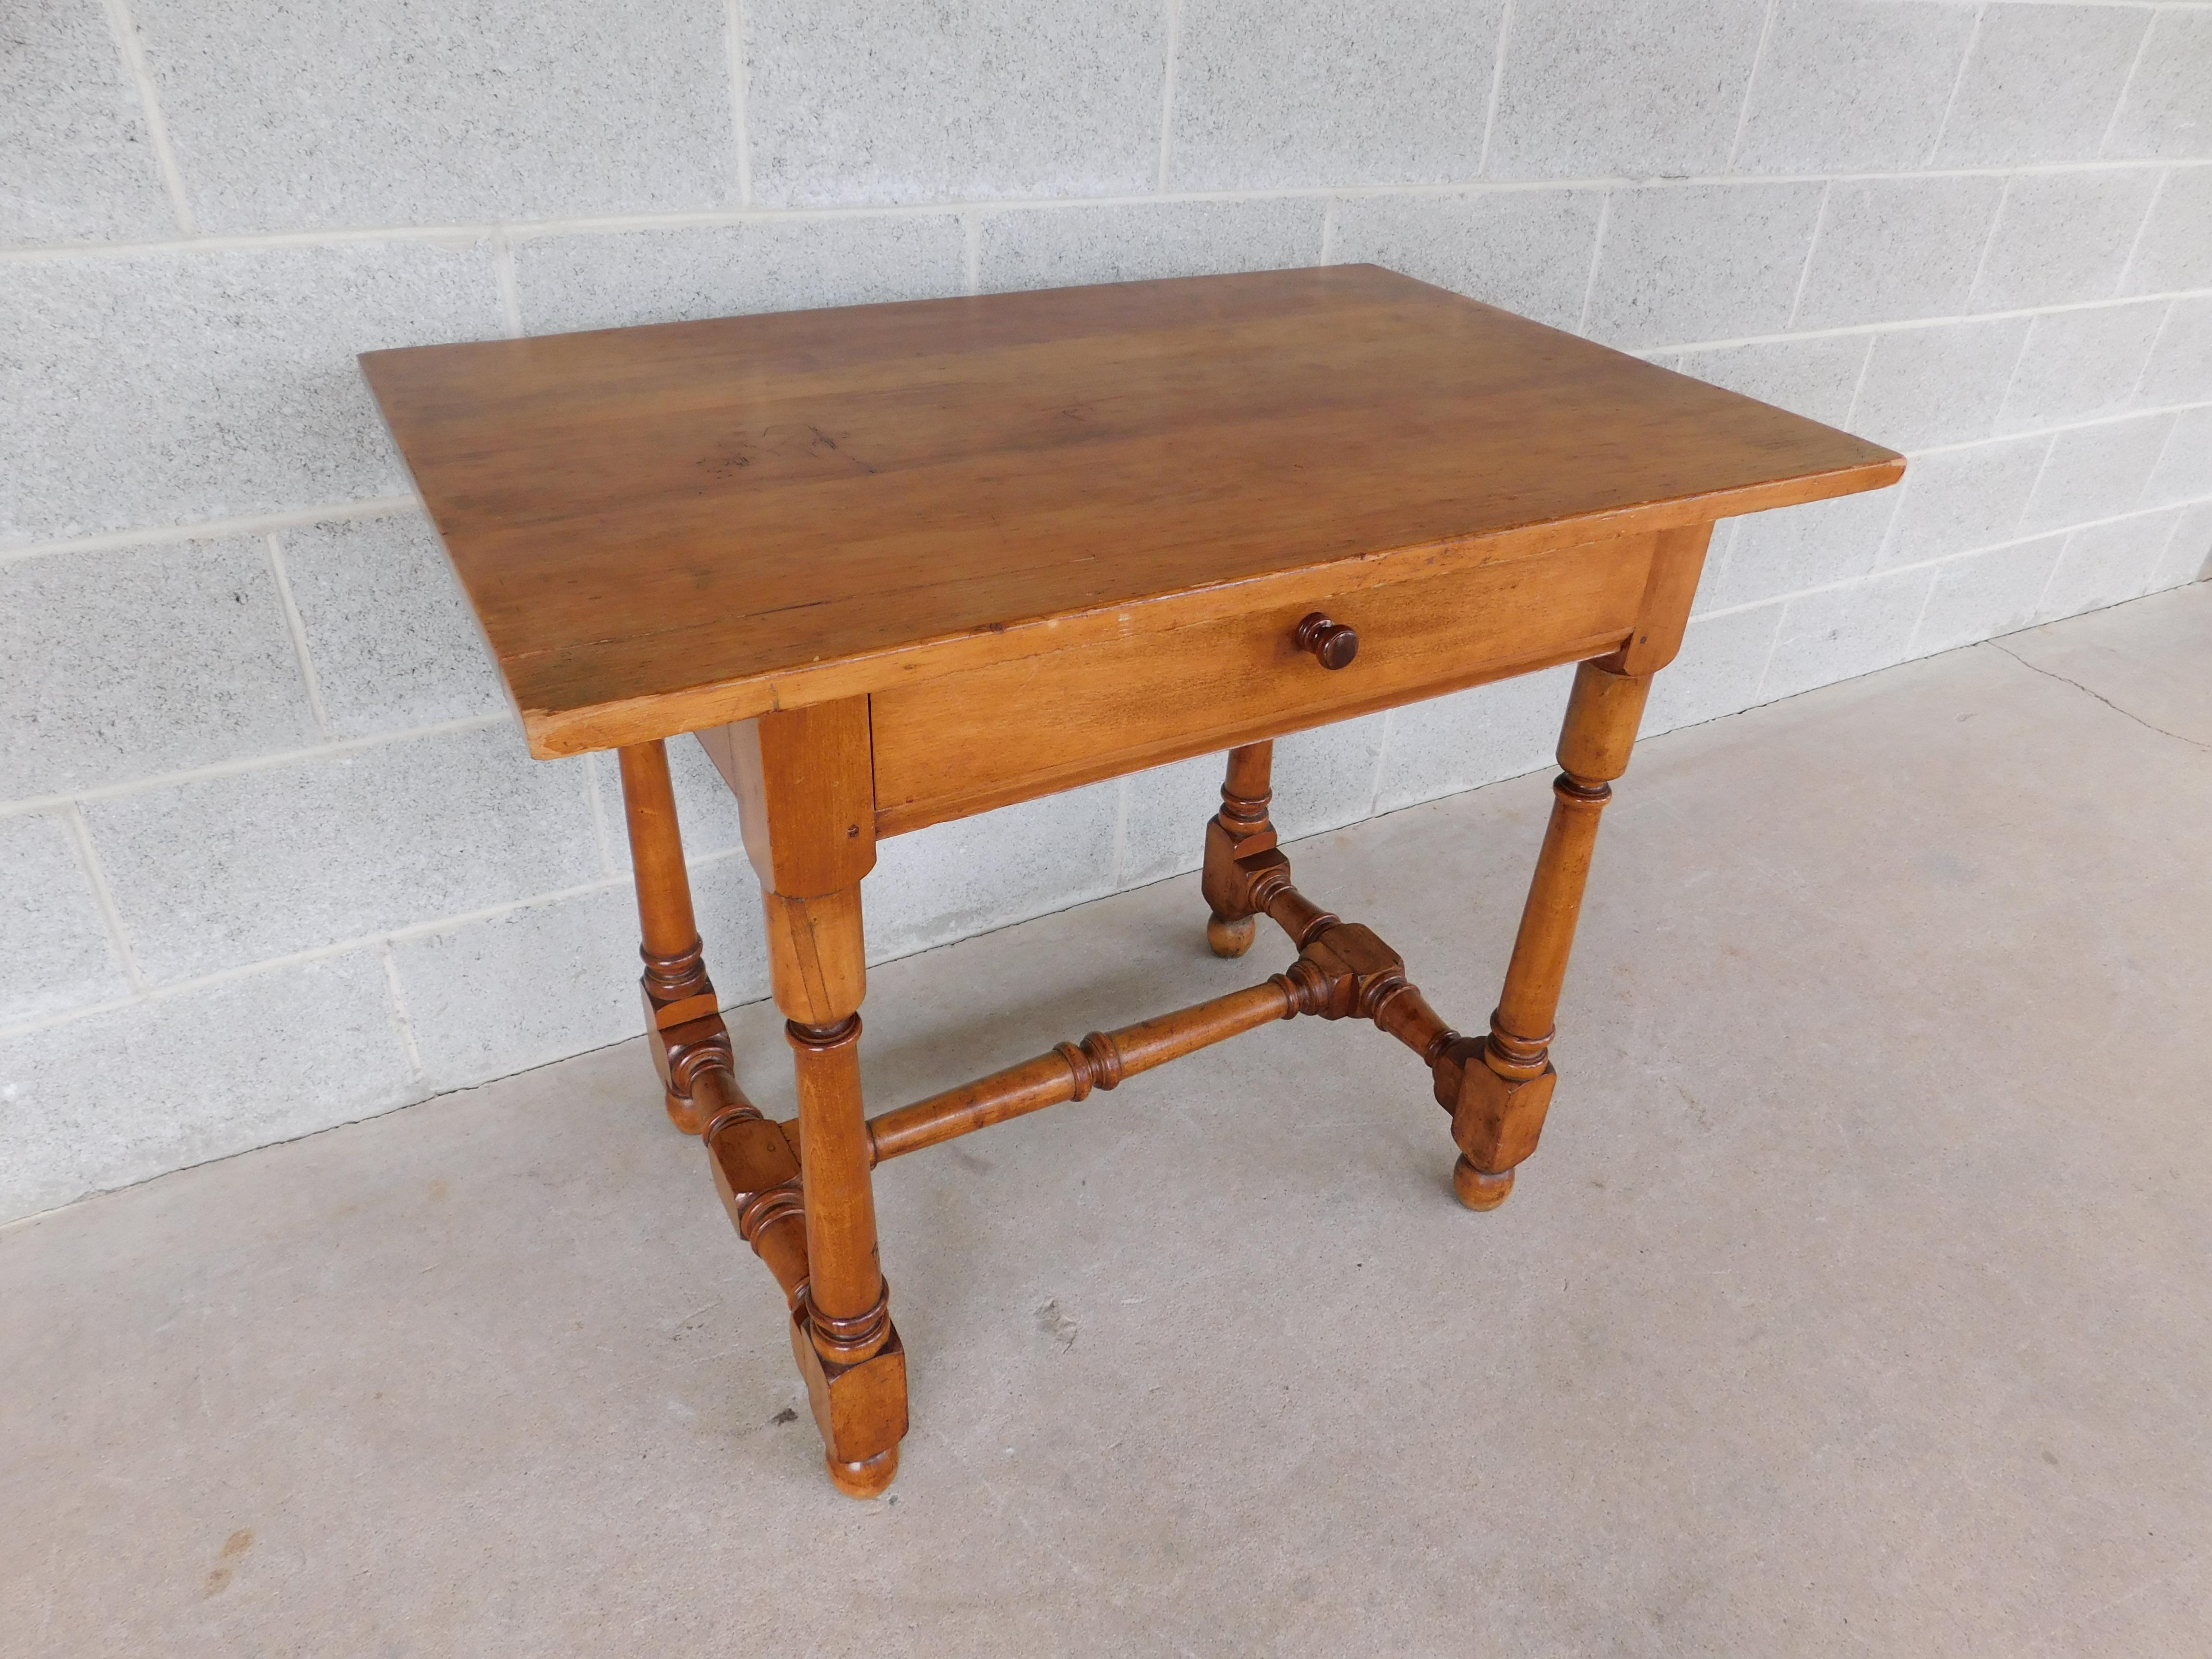 Wallace Nutting Tavern Table #660

Circa 1920's Hardwood Construction, Single Dovetailed Drawer, Joined Stretcher Base.

Writing Desk or Work / Tavern Table

Original Finish and Good Sturdy Condition

36